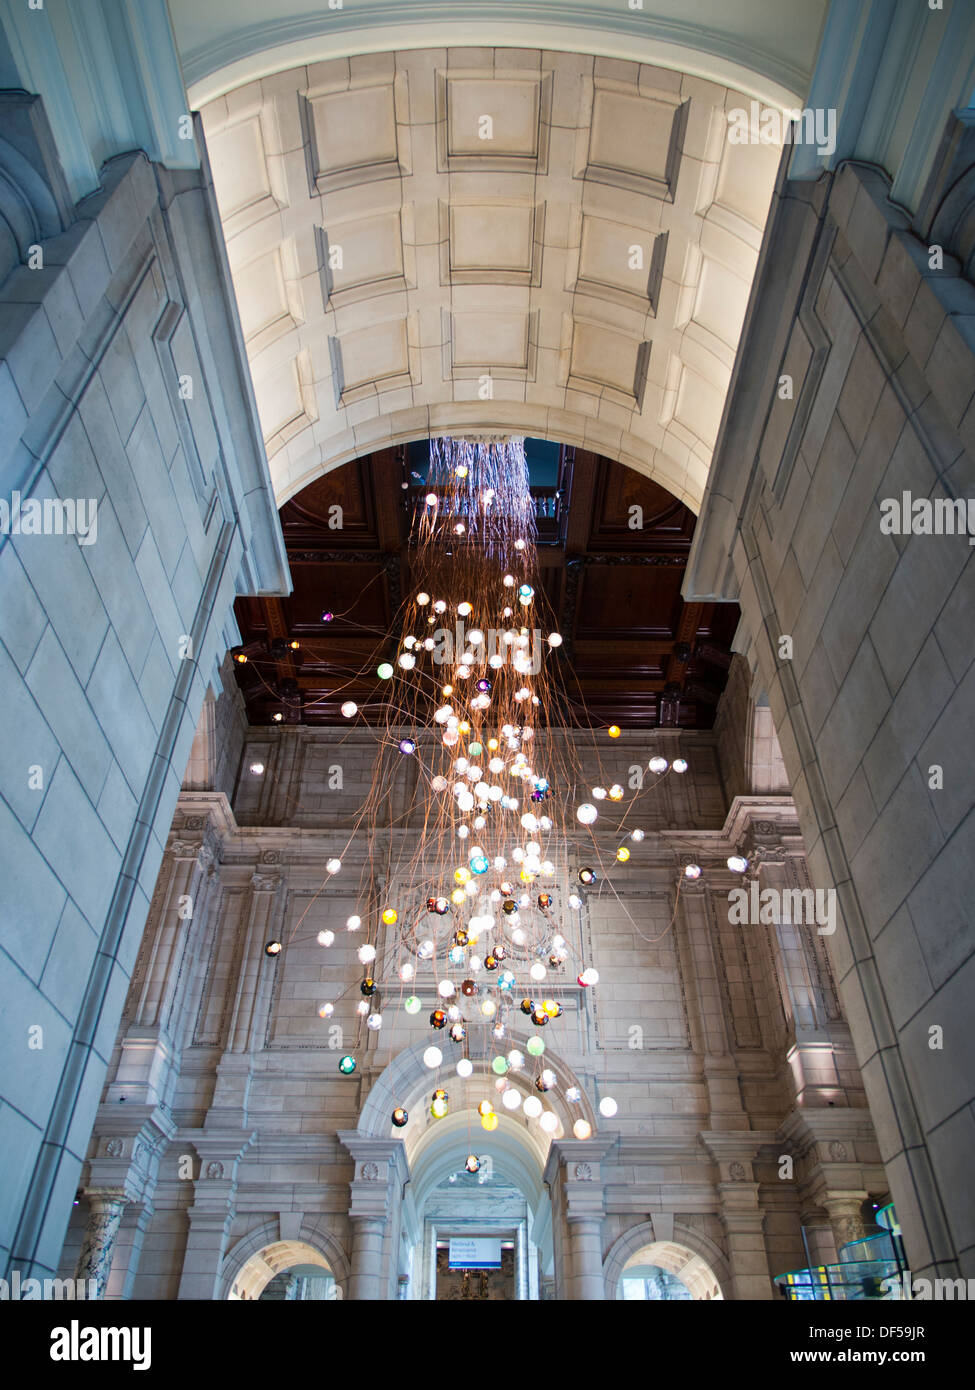 The Victoria and Albert Museum, London - new hanging lights sculpture in the foyer 1 Stock Photo